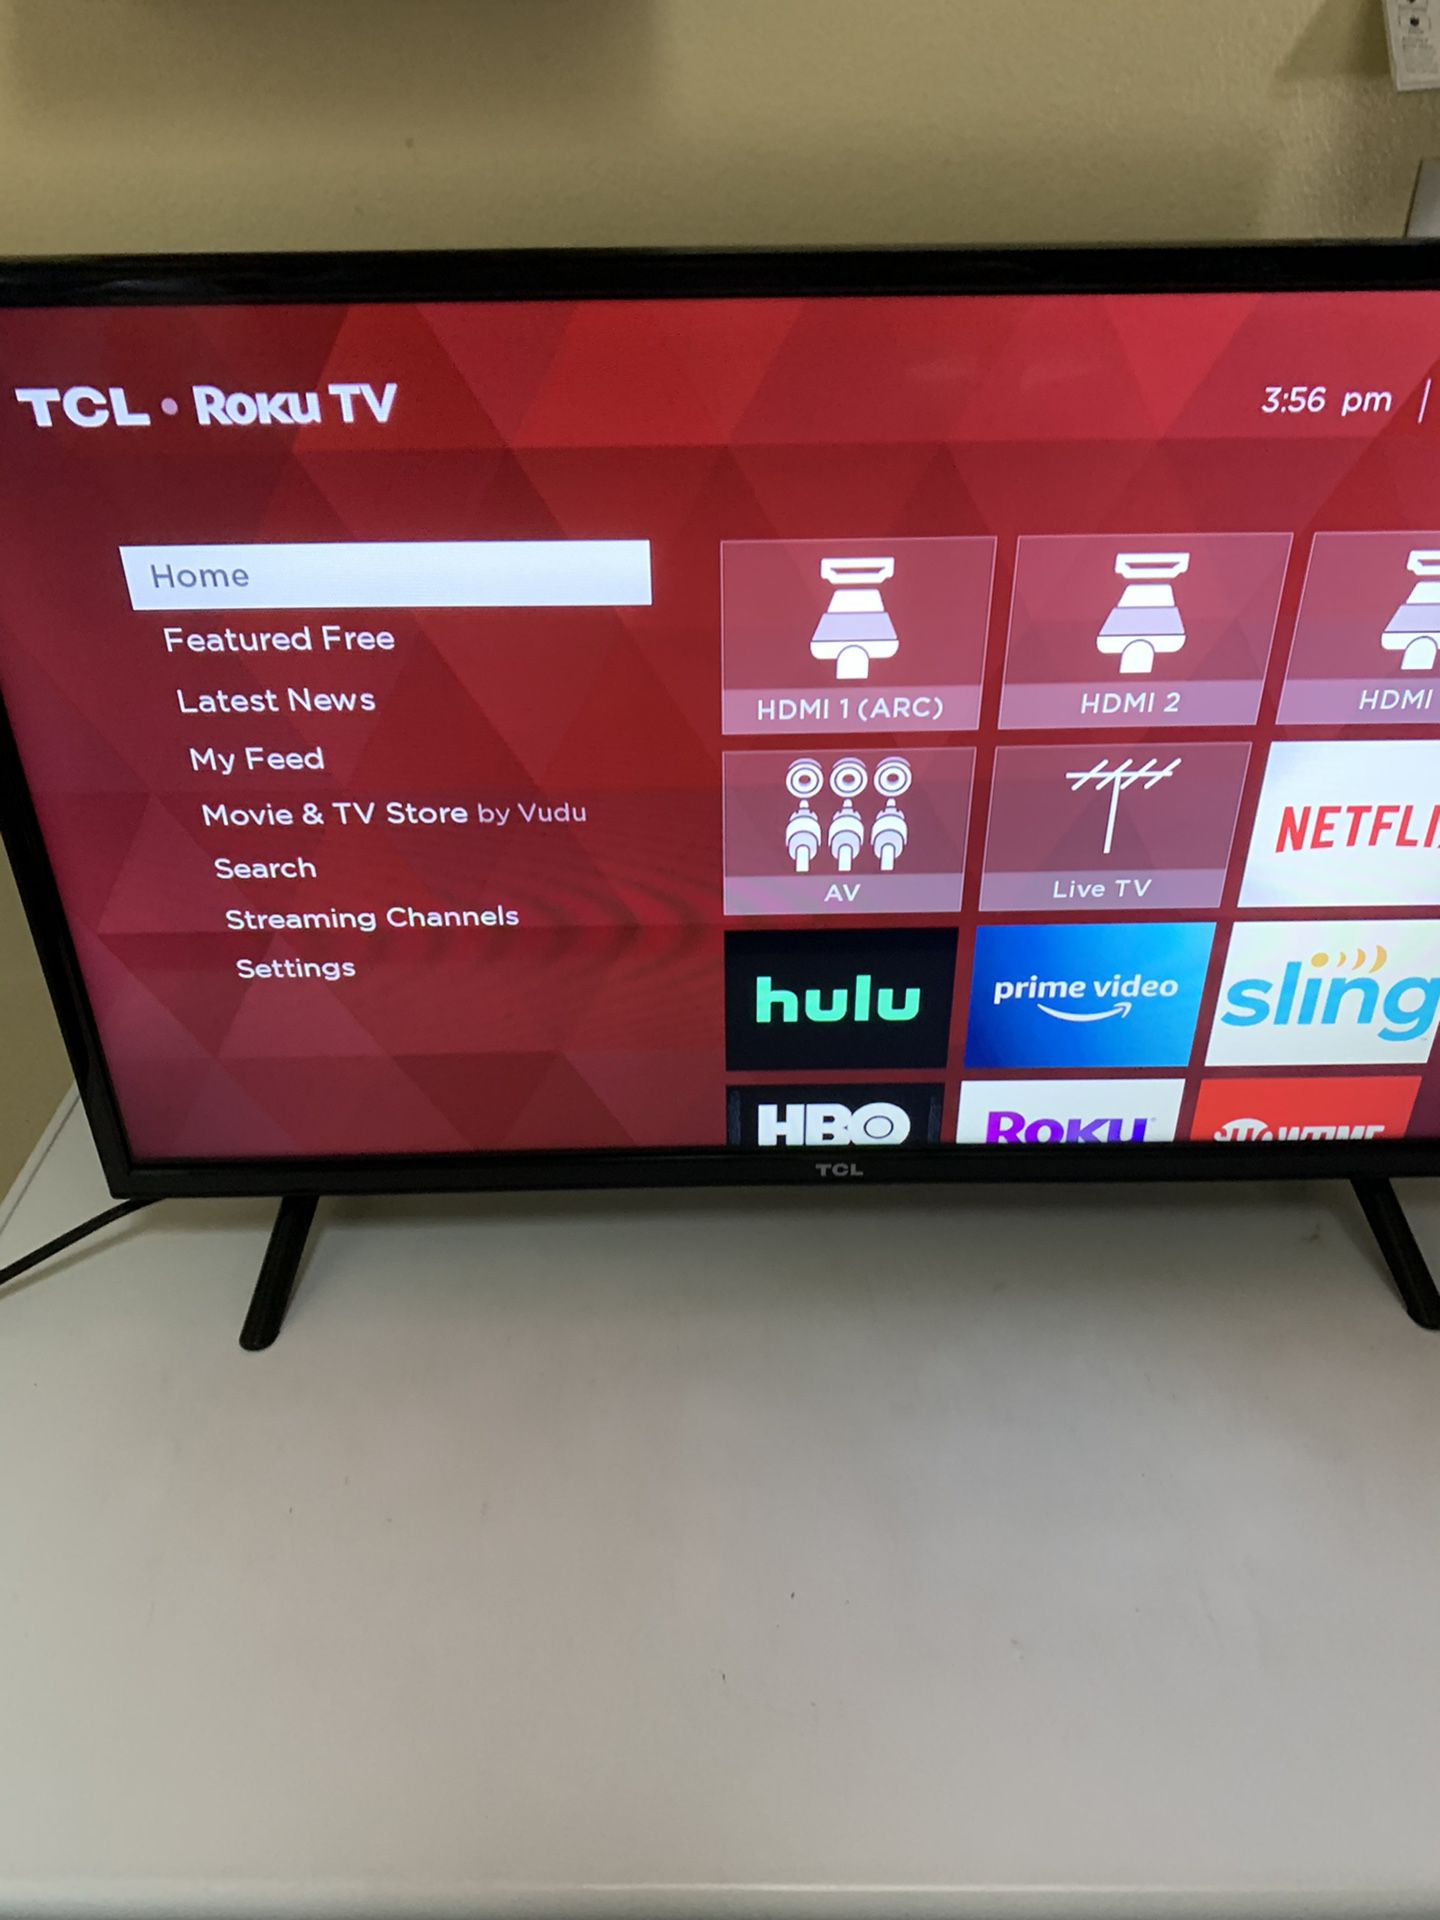 32” tcl roku smart tv with remote model # 32s301